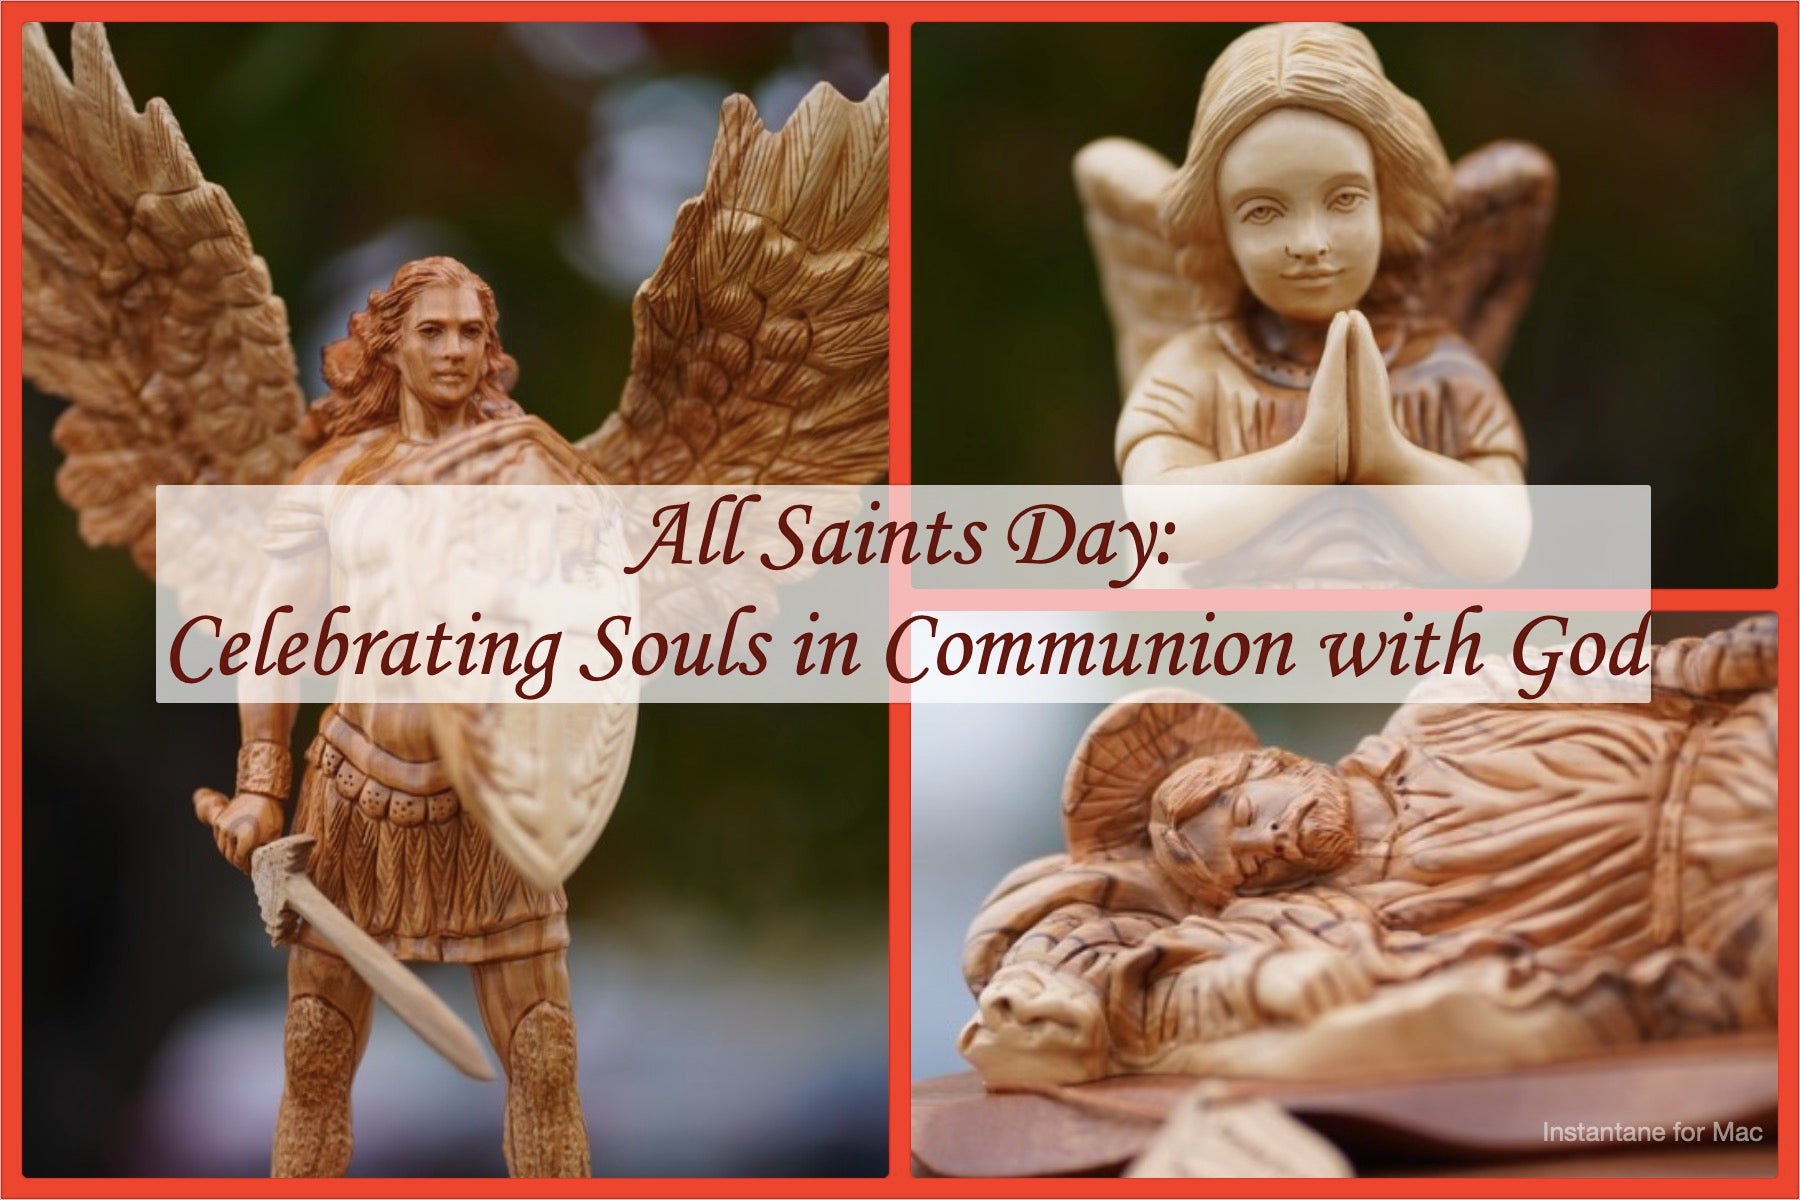 All Saints Day: Celebrating Souls in Communion with God